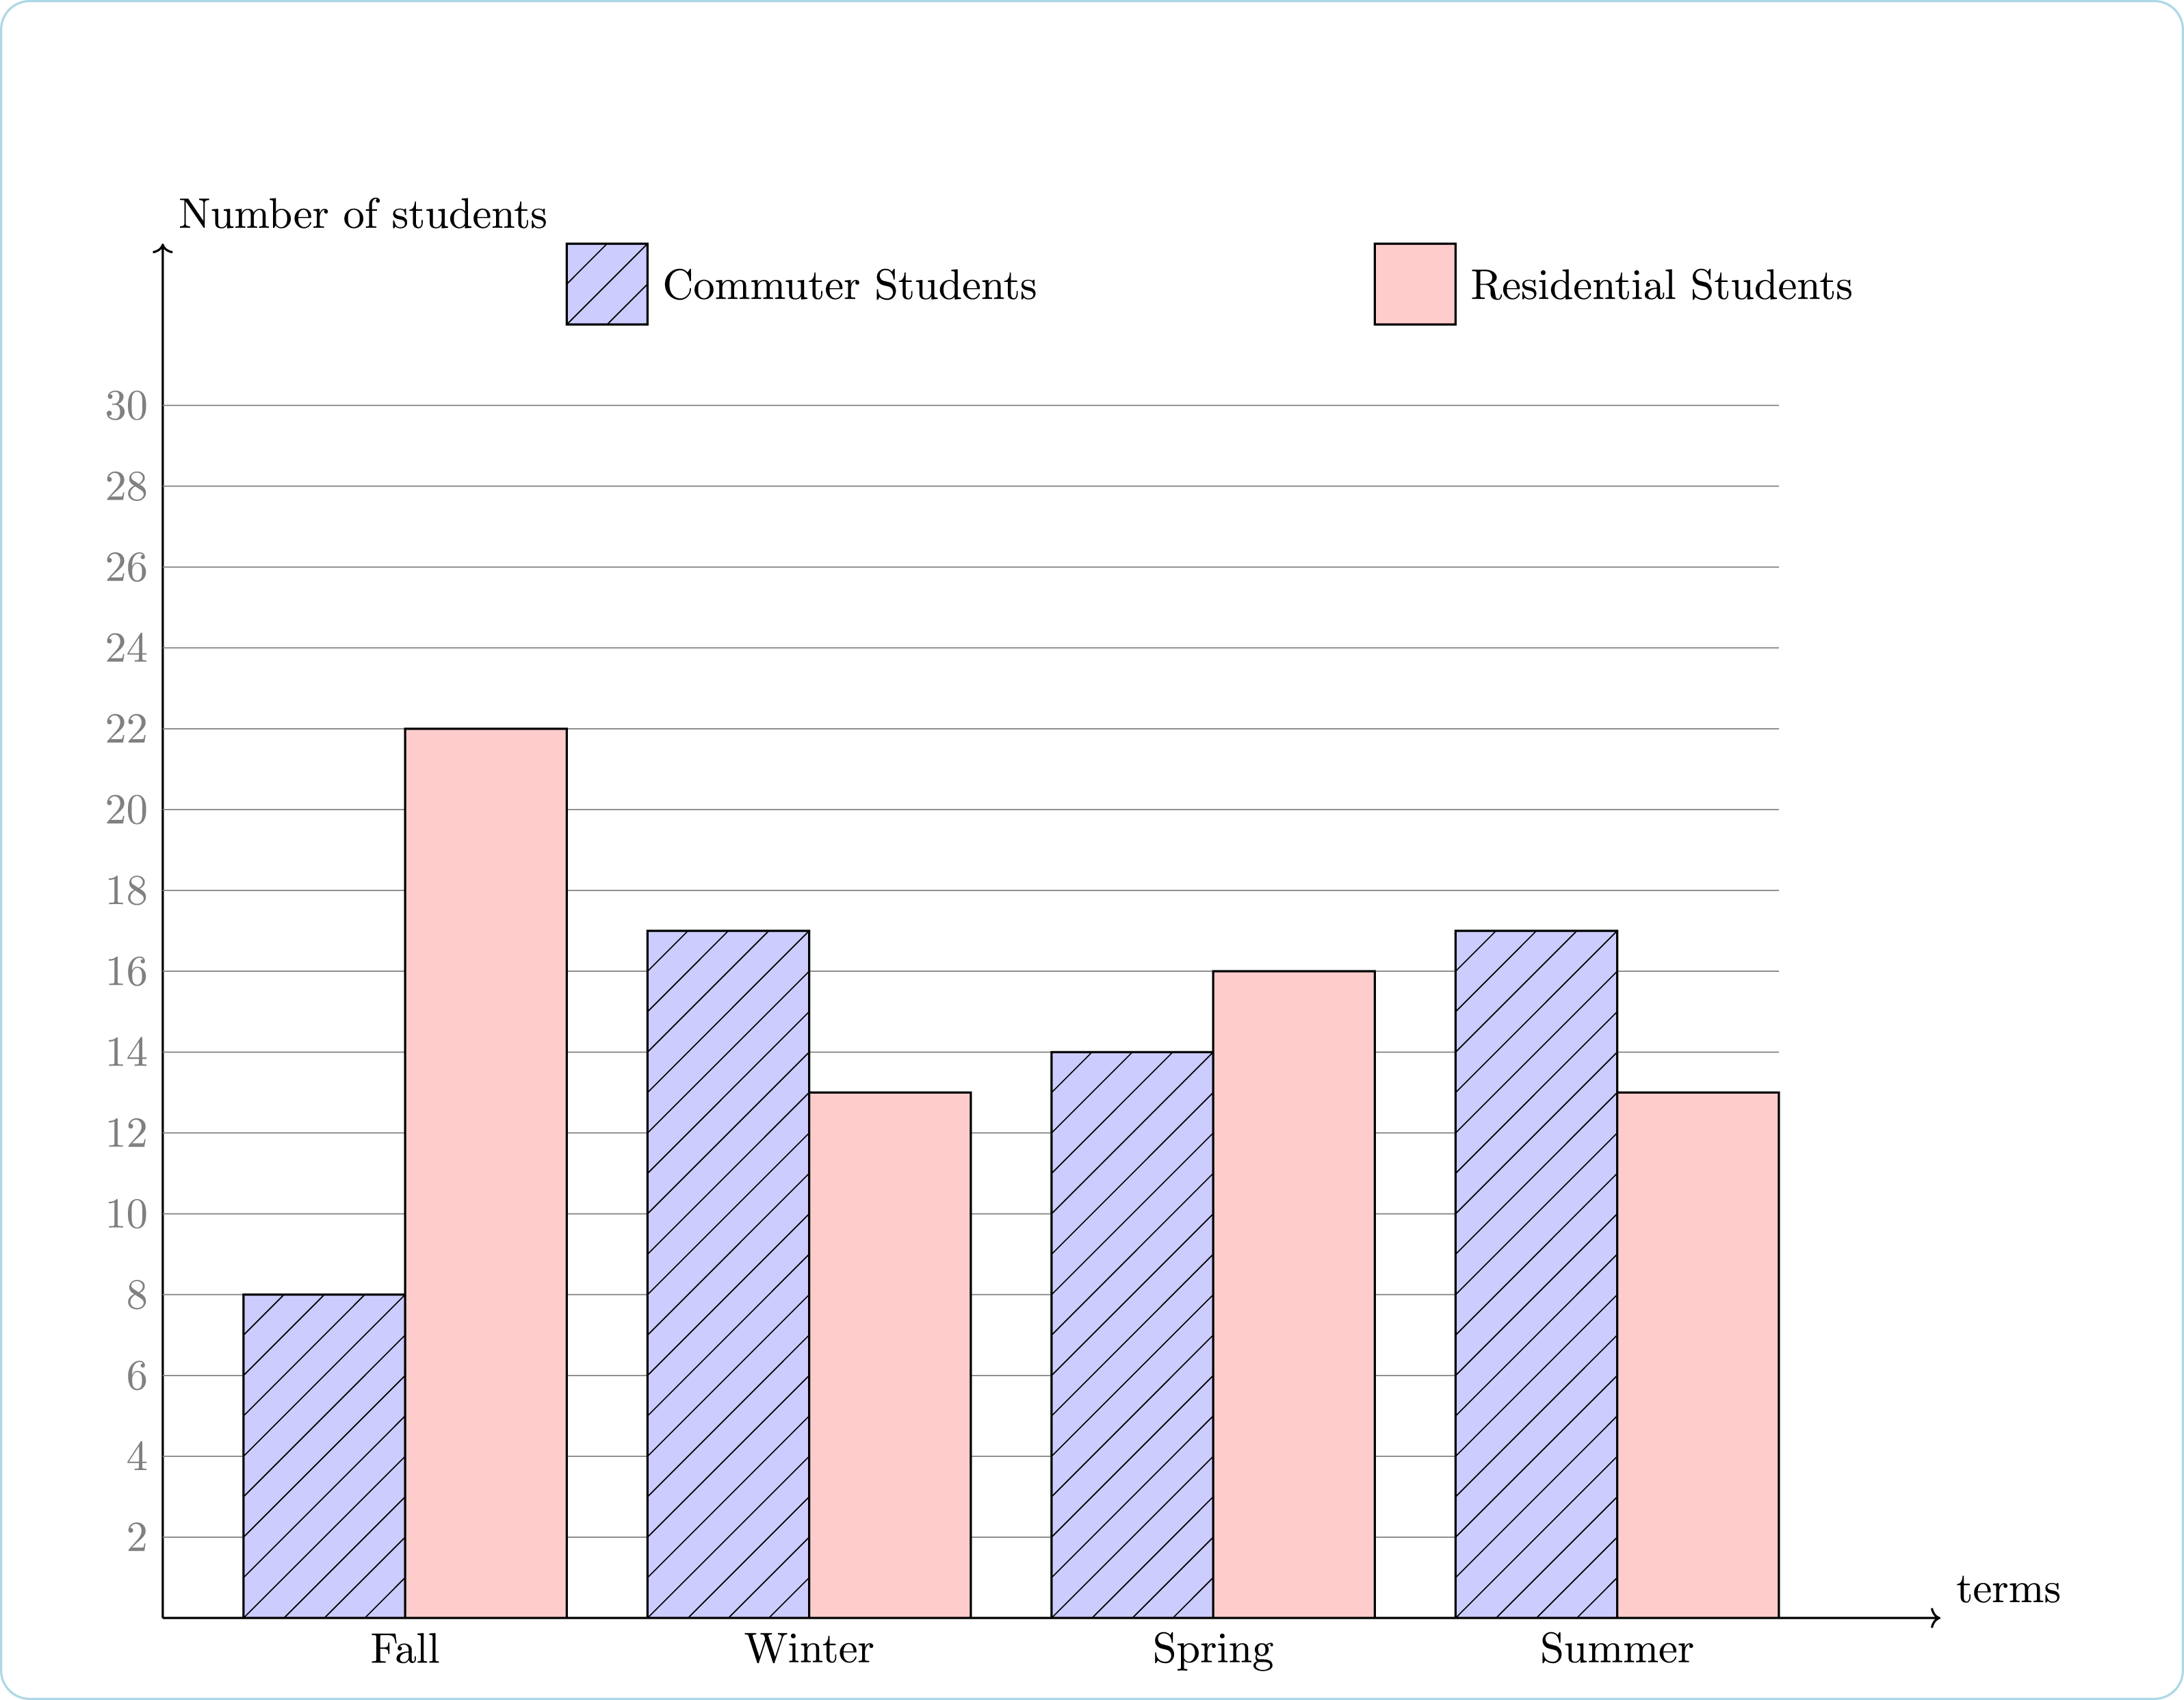 This graph is a double bar graph that compares commuter students (in purple with crosshatching) with residential students (in pink) in a certain class. The terms (Fall, Winter, Spring, Summer) are on the horizontal axis and the number of students are on the vertical axis. In Fall Term, this class had 8 commuter students and 22 residential students.In Winter Term, this class had 17 commuter students and 13 residential students.In Spring Term, this class had 14 commuter students and 16 residential students.In Summer Term, this class had 17 commuter students and 13 residential students.